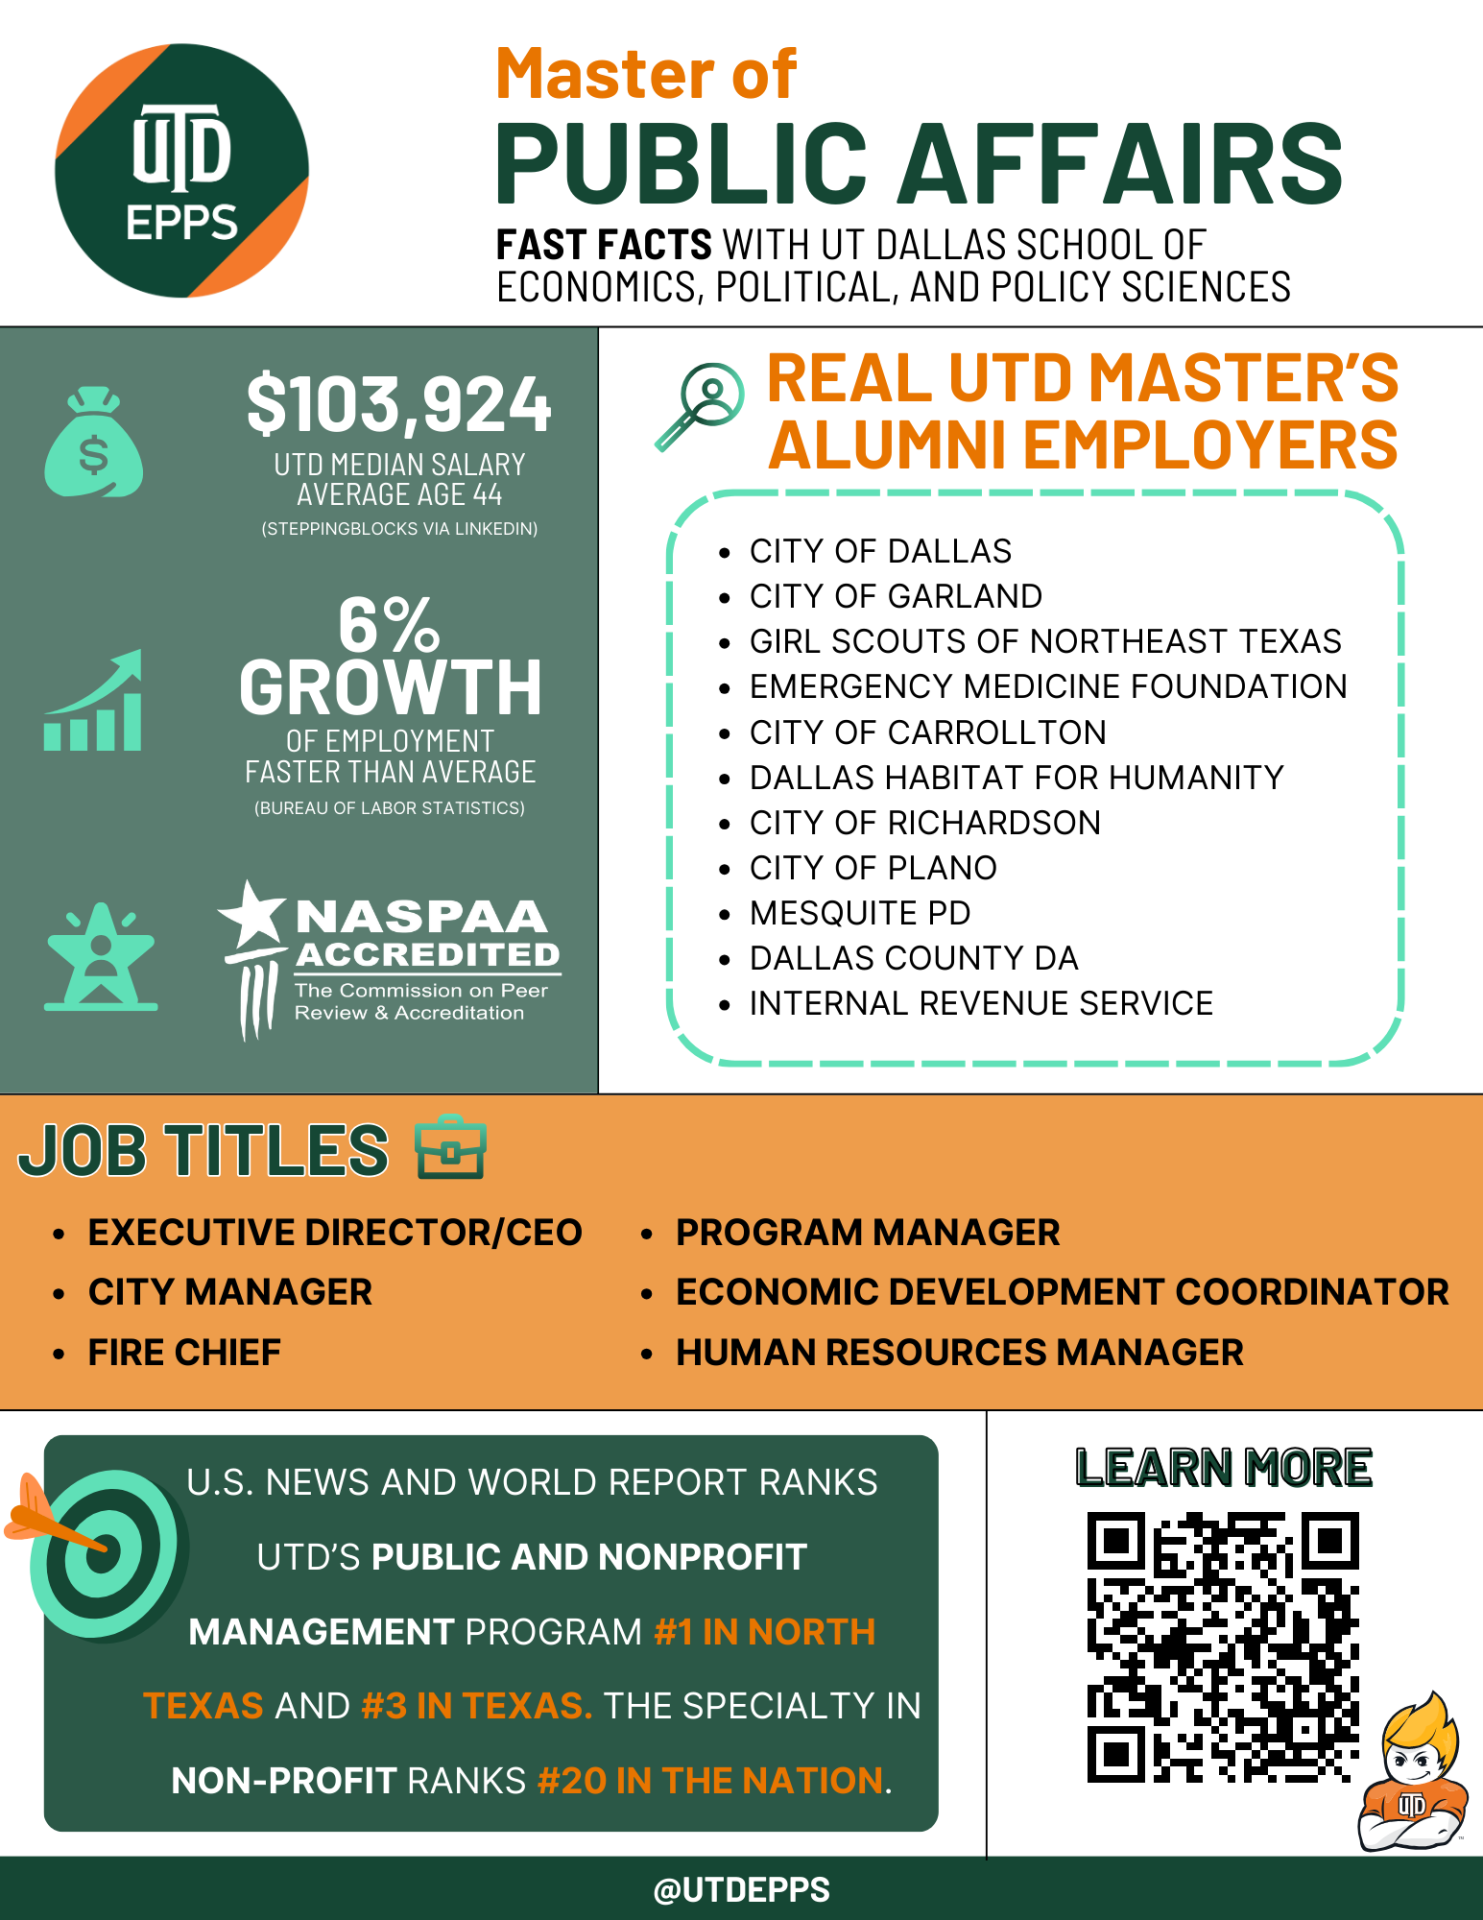 Master of PUBLIC AFFAIRS. Fast Facts with Ut dallas school of 
economics, political, and policy sciences.

3,924 is the UTD Median Salary
(Average age 44). Data is from Steppingblocks via Linkedin. 6% Growth OF EMPLOYMENT which is
FASTER THAN AVERAGE. Data is from Bureau of Labor Statistics. NASPAA Accredited.

REAL UTD MASTER’S ALUMNI EMPLOYERS
City of Dallas
City of Garland
Girl Scouts of Northeast Texas
Emergency Medicine Foundation
City of Carrollton
Dallas habitat for humanity
City of Richardson
City of Plano
Mesquite PD
Dallas county DA
Internal Revenue Service

Job titles include:
Executive Director/CEO
City Manager
Fire Chief
Program Manager
Economic Development Coordinator
Human Resources Manager

U.S. NEWS AND WORLD REPORT RANKS UTD’S PUBLIC AND NONPROFIT MANAGEMENT PROGRAM #1 IN NORTH TEXAS AND #3 IN TEXAS. THE SPECIALTY IN NON-PROFIT RANKS #20 IN THE NATION.

LEARN MORE by scanning the QR code.

@UTDEPPS